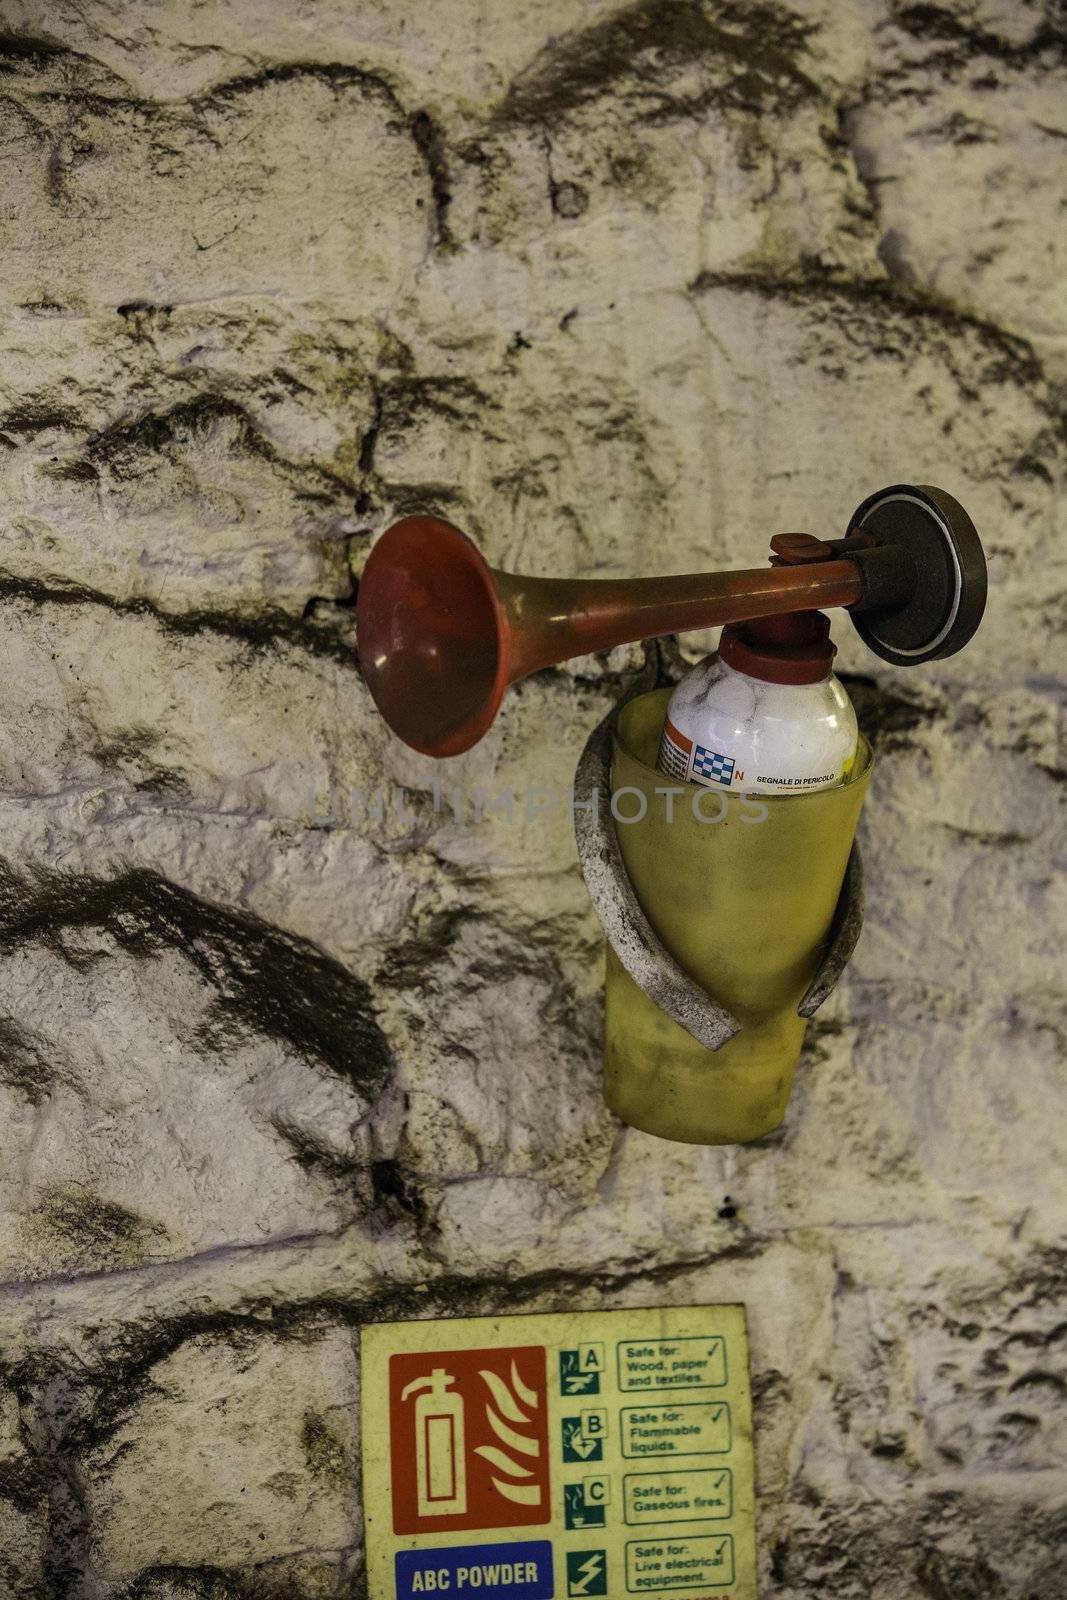 Fire extinguisher and large trumpet shaped nozzle mounted on an old stone wall